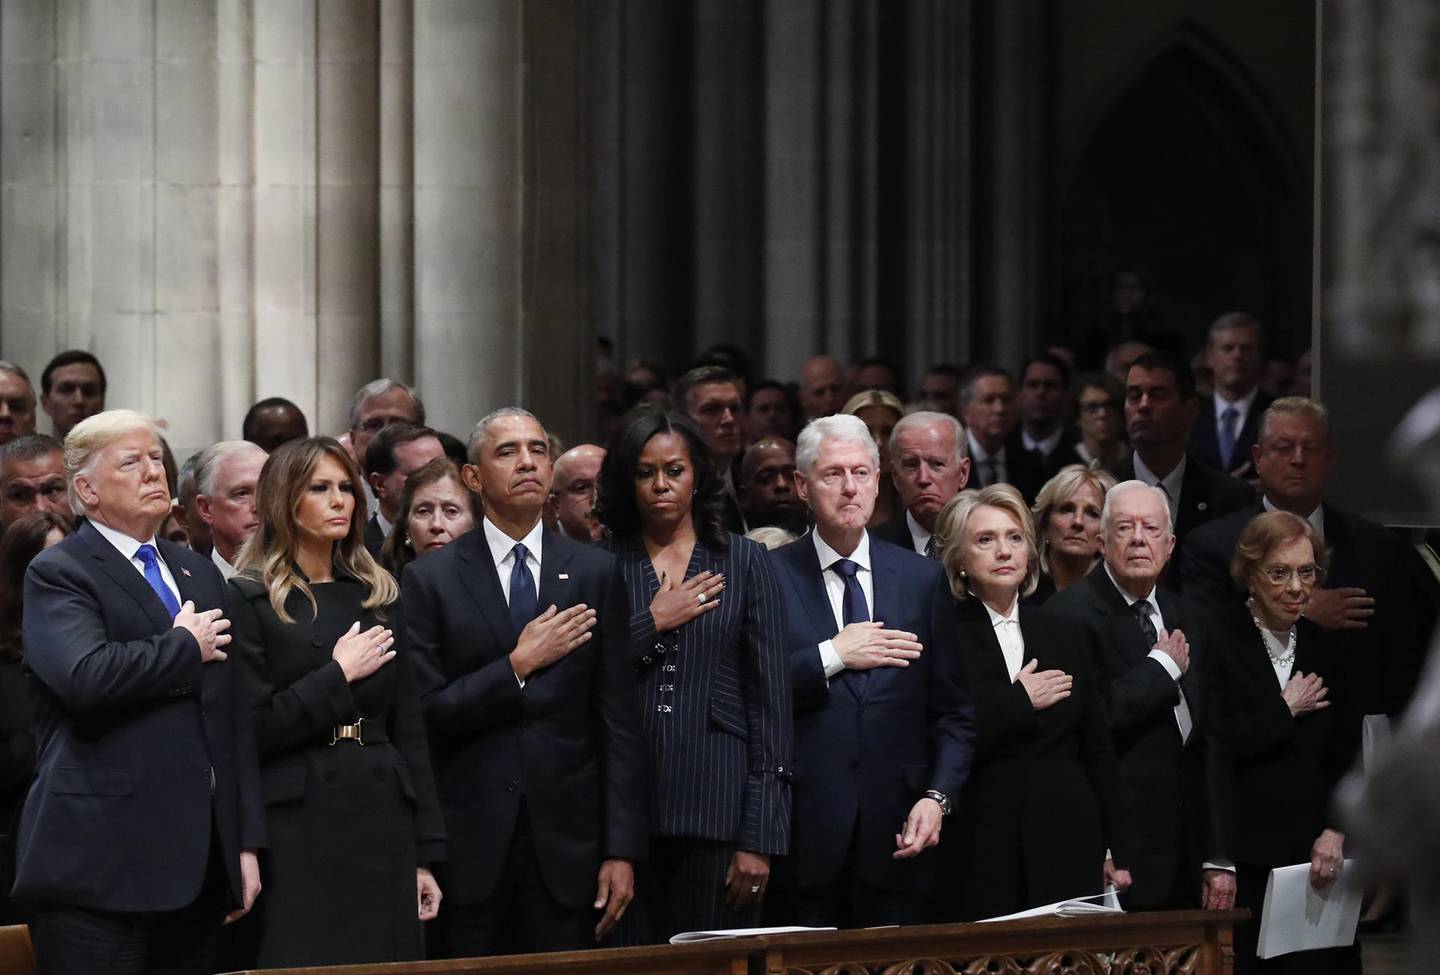 FILE: Bloomberg Best Of U.S. President Donald Trump 2017 - 2020: U.S. President Donald Trump, from left, U.S. First Lady Melania Trump, former U.S. President Barack Obama, former U.S. First Lady Michelle Obama, former U.S. President Bill Clinton, Hillary Clinton, former U.S. secretary of state, former U.S. President Jimmy Carter, and former U.S. First Lady Rosalynn Carter stand during a state funeral service for former President George H.W. Bush at the National Cathedral in Washington, D.C., U.S., on Wednesday, Dec. 5, 2018. Our editors select the best archive images looking back at Trump’s 4 year term from 2017 - 2020. Photographer: Alex Brandon/Bloomberg